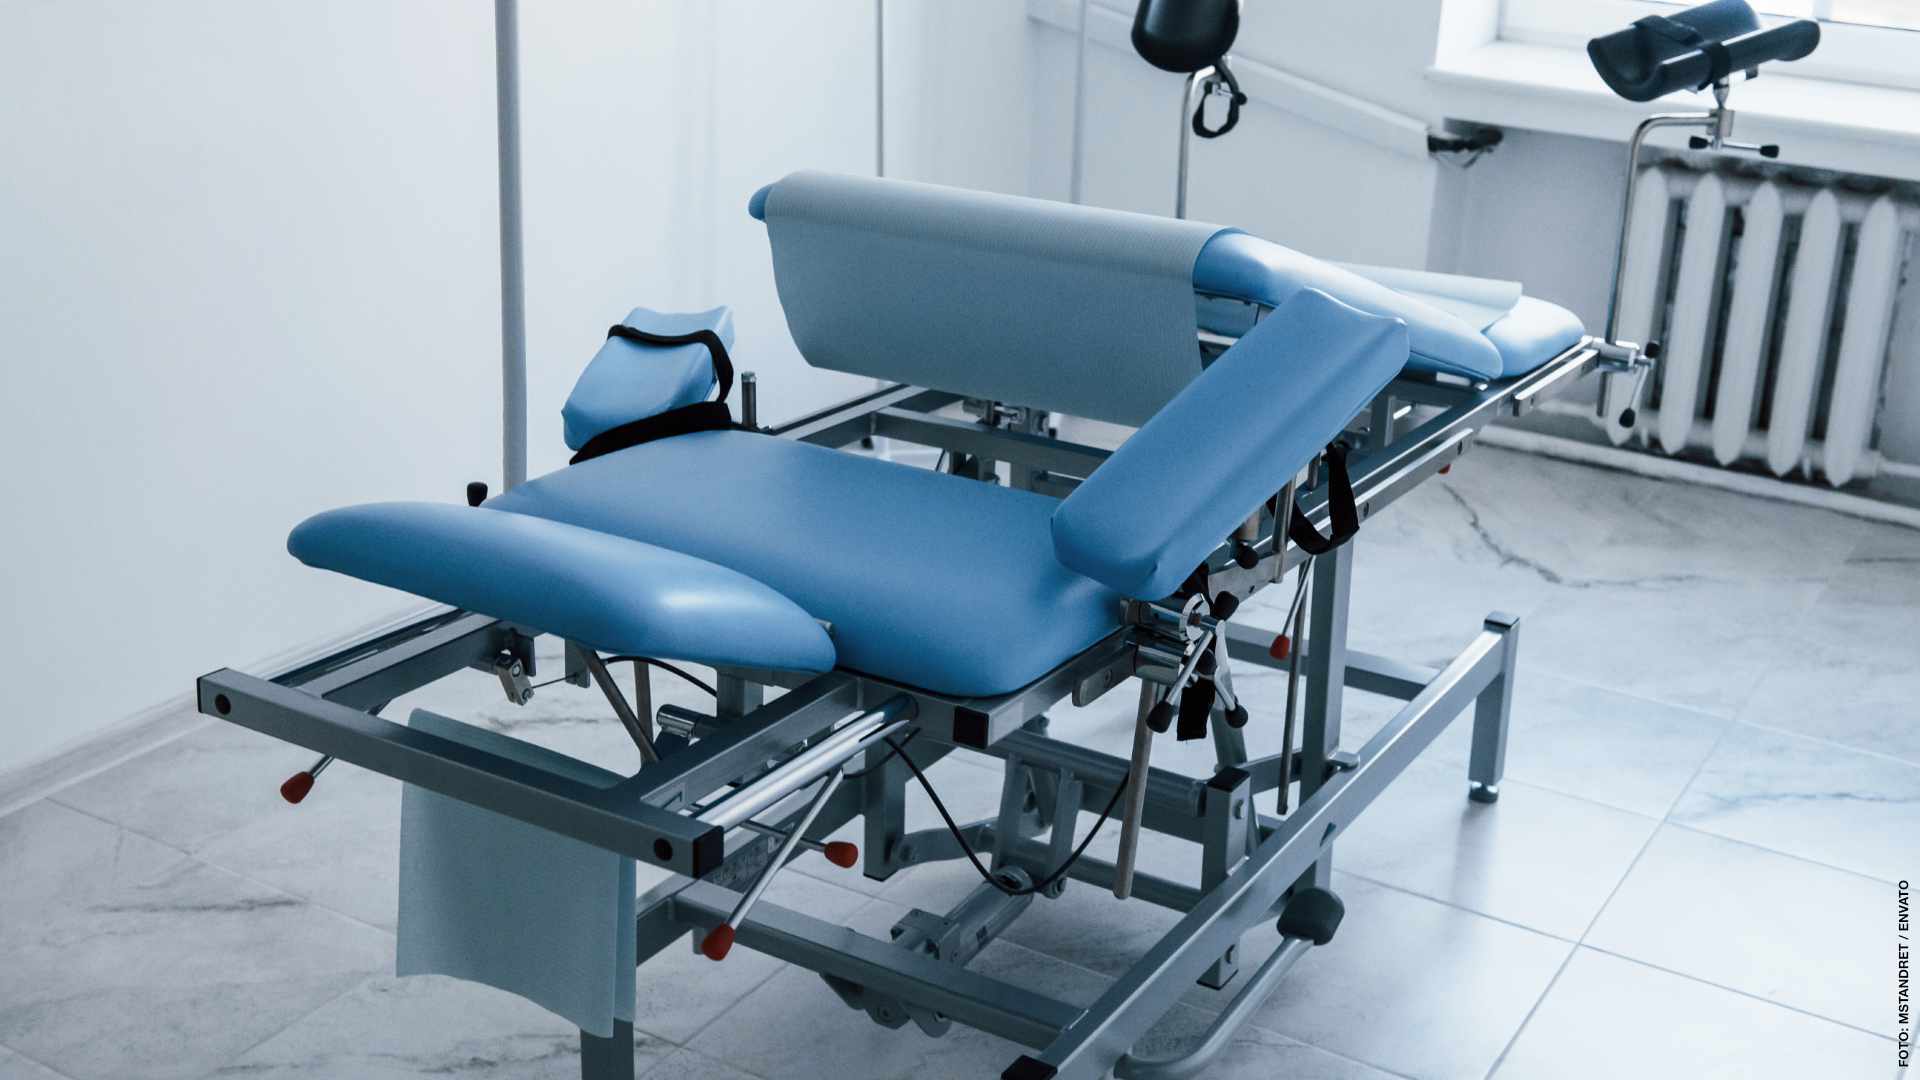 Blue colored obstetric bed indoors in the clinic cabinet at daytime.